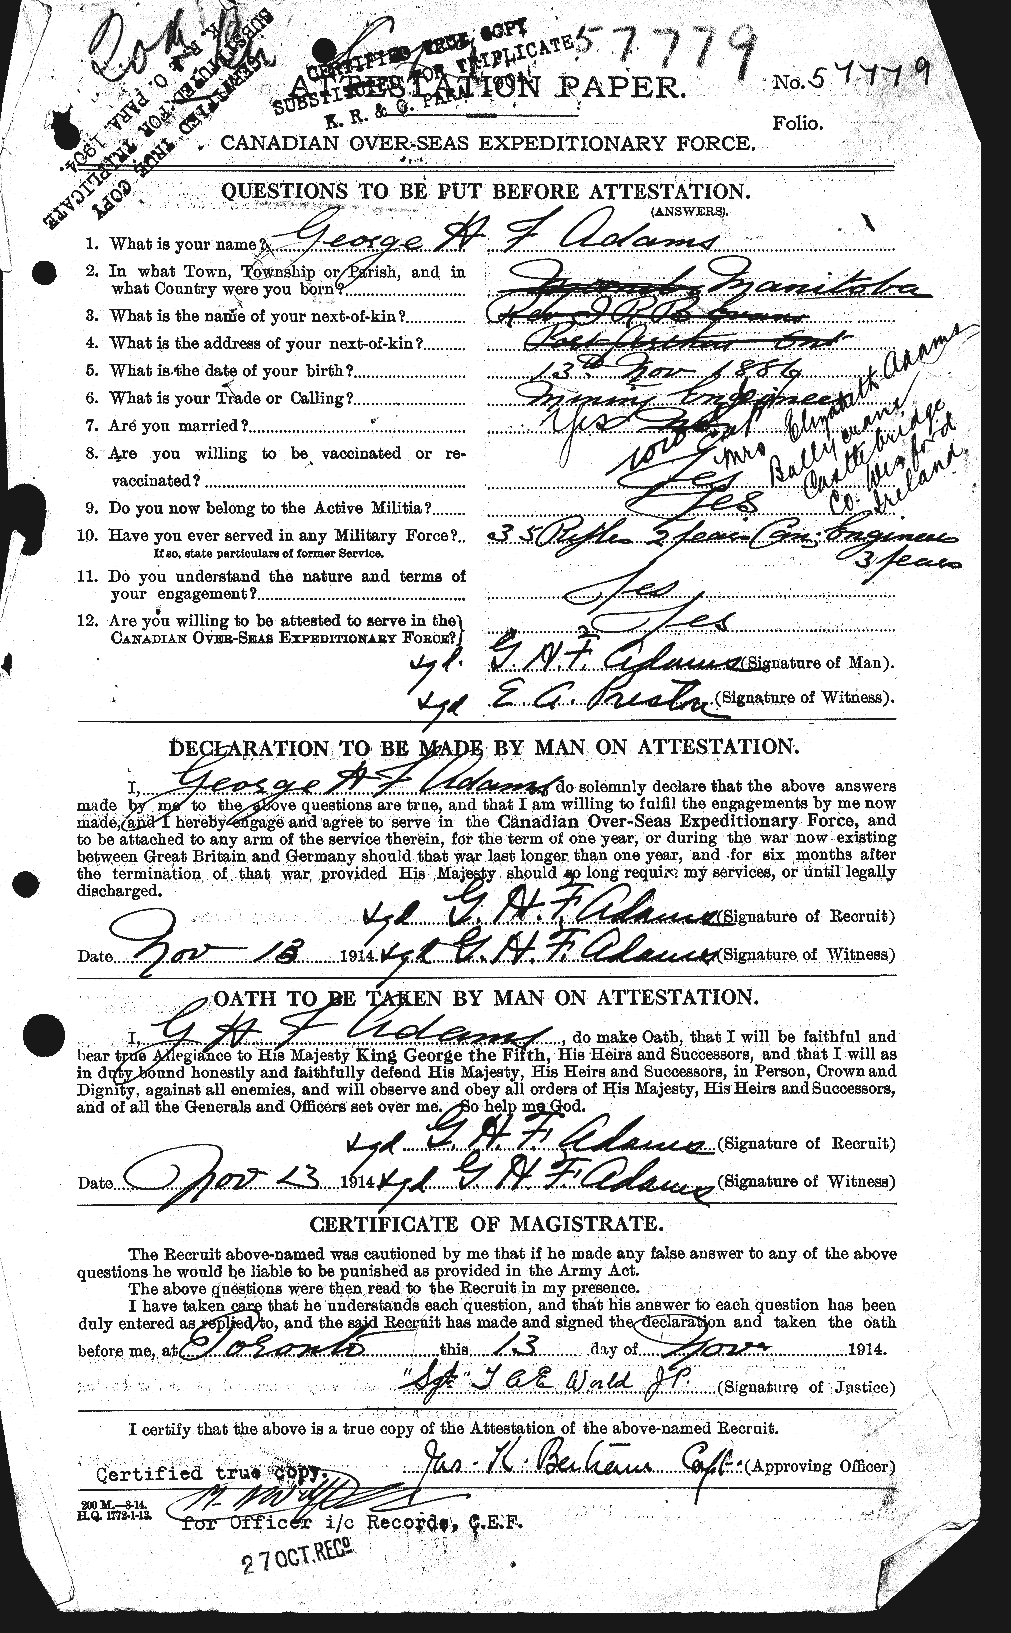 Personnel Records of the First World War - CEF 202567a